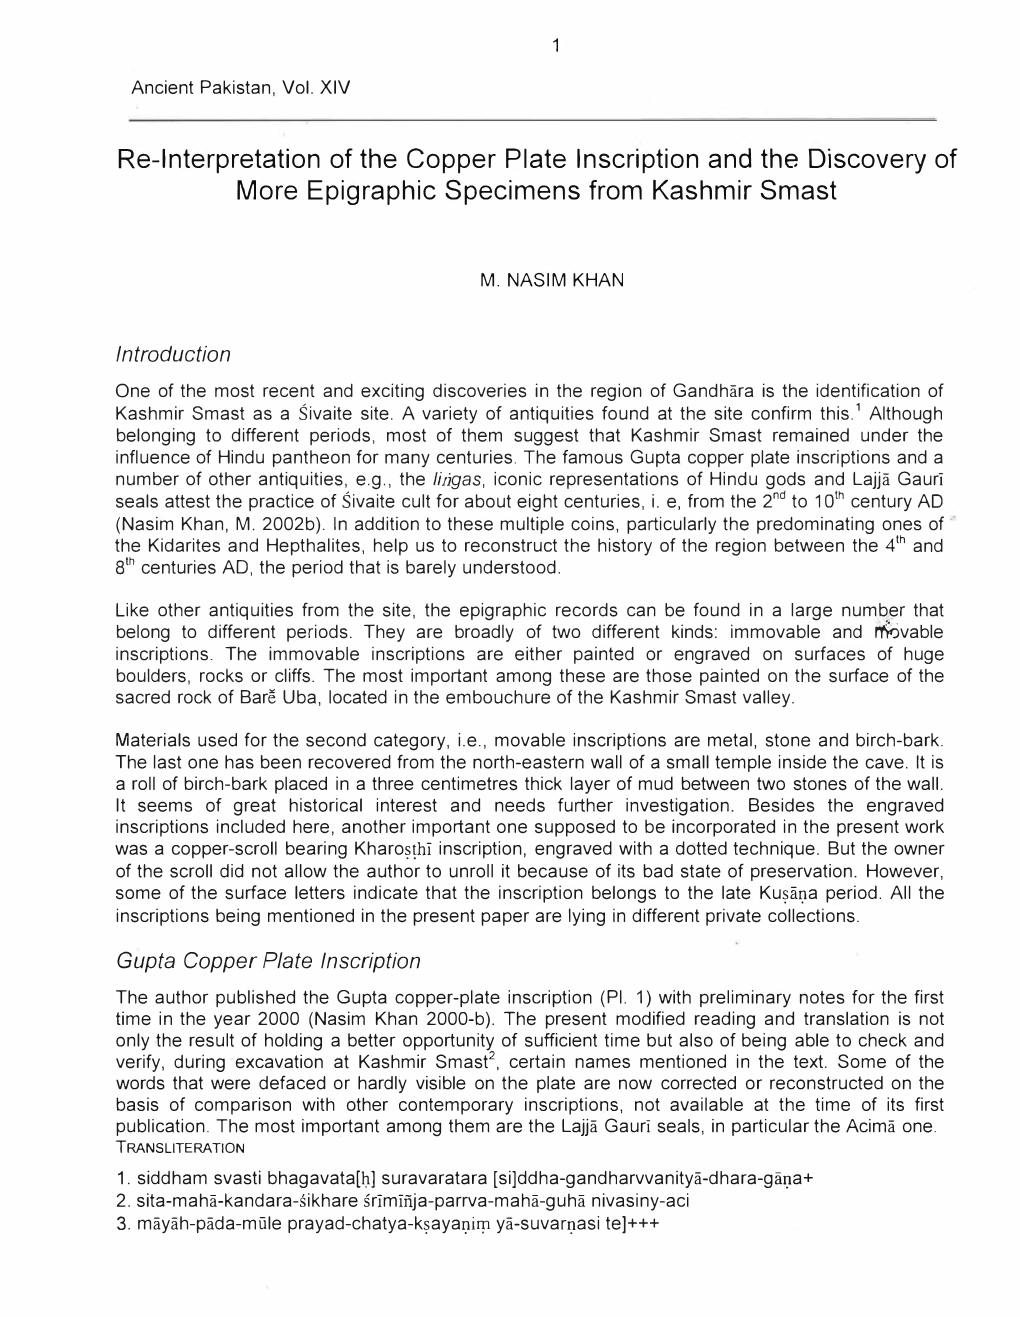 Re-Interpretation of the Copper Plate Inscription and the Discovery of More Epigraphic Specimens from Kashmir Smast